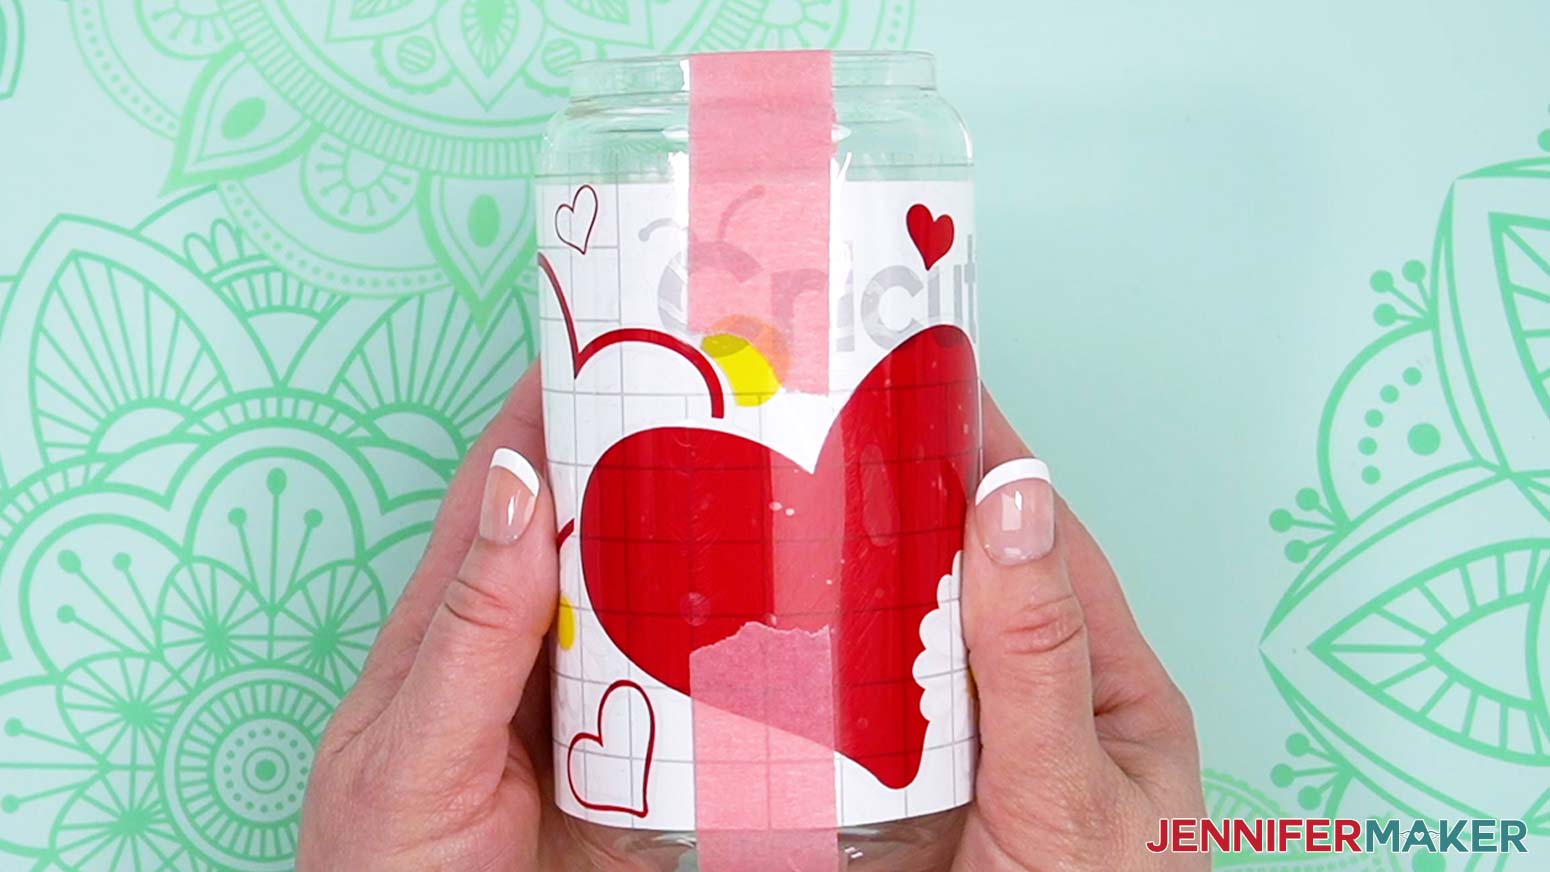 Tape the design to the glass jar using painters tape on the top and bottom of the design in the middle of the layer.